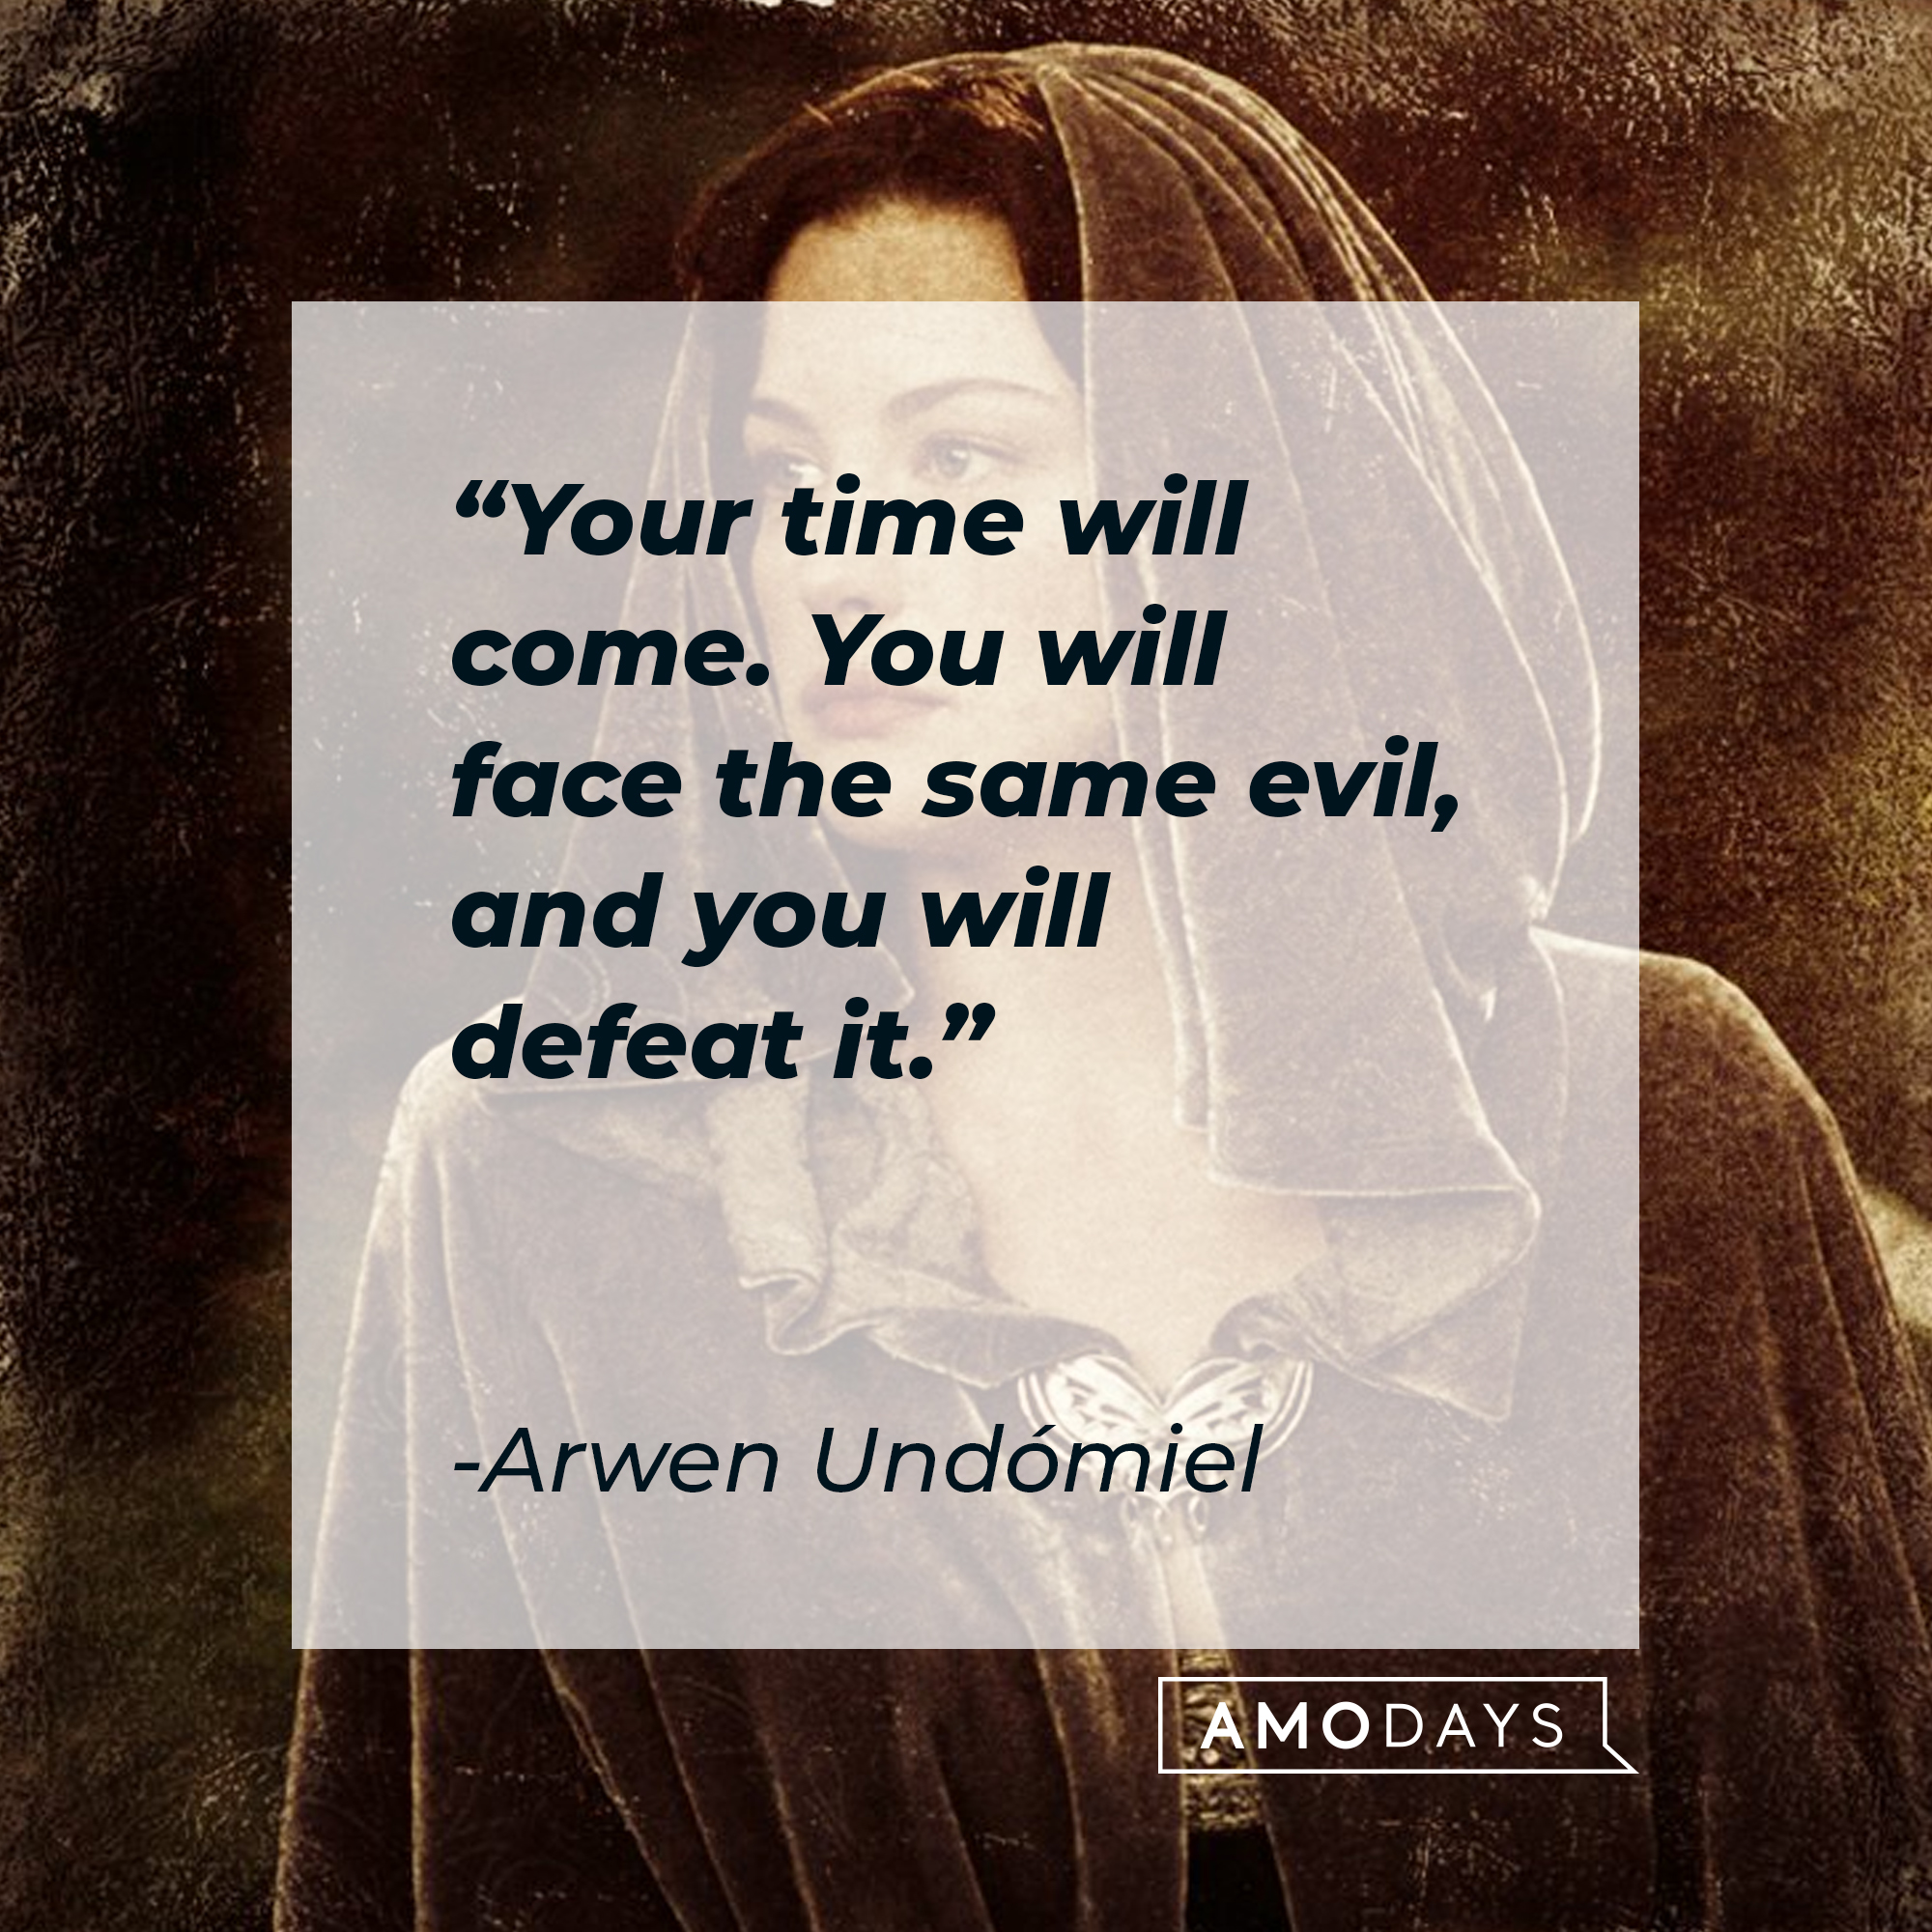 Arwen Undómiel and her quote from "Lord of the Rings:" "Your time will come. You will face the same evil, and you will defeat it." | Source: Facebook/lordoftheringstrilogy